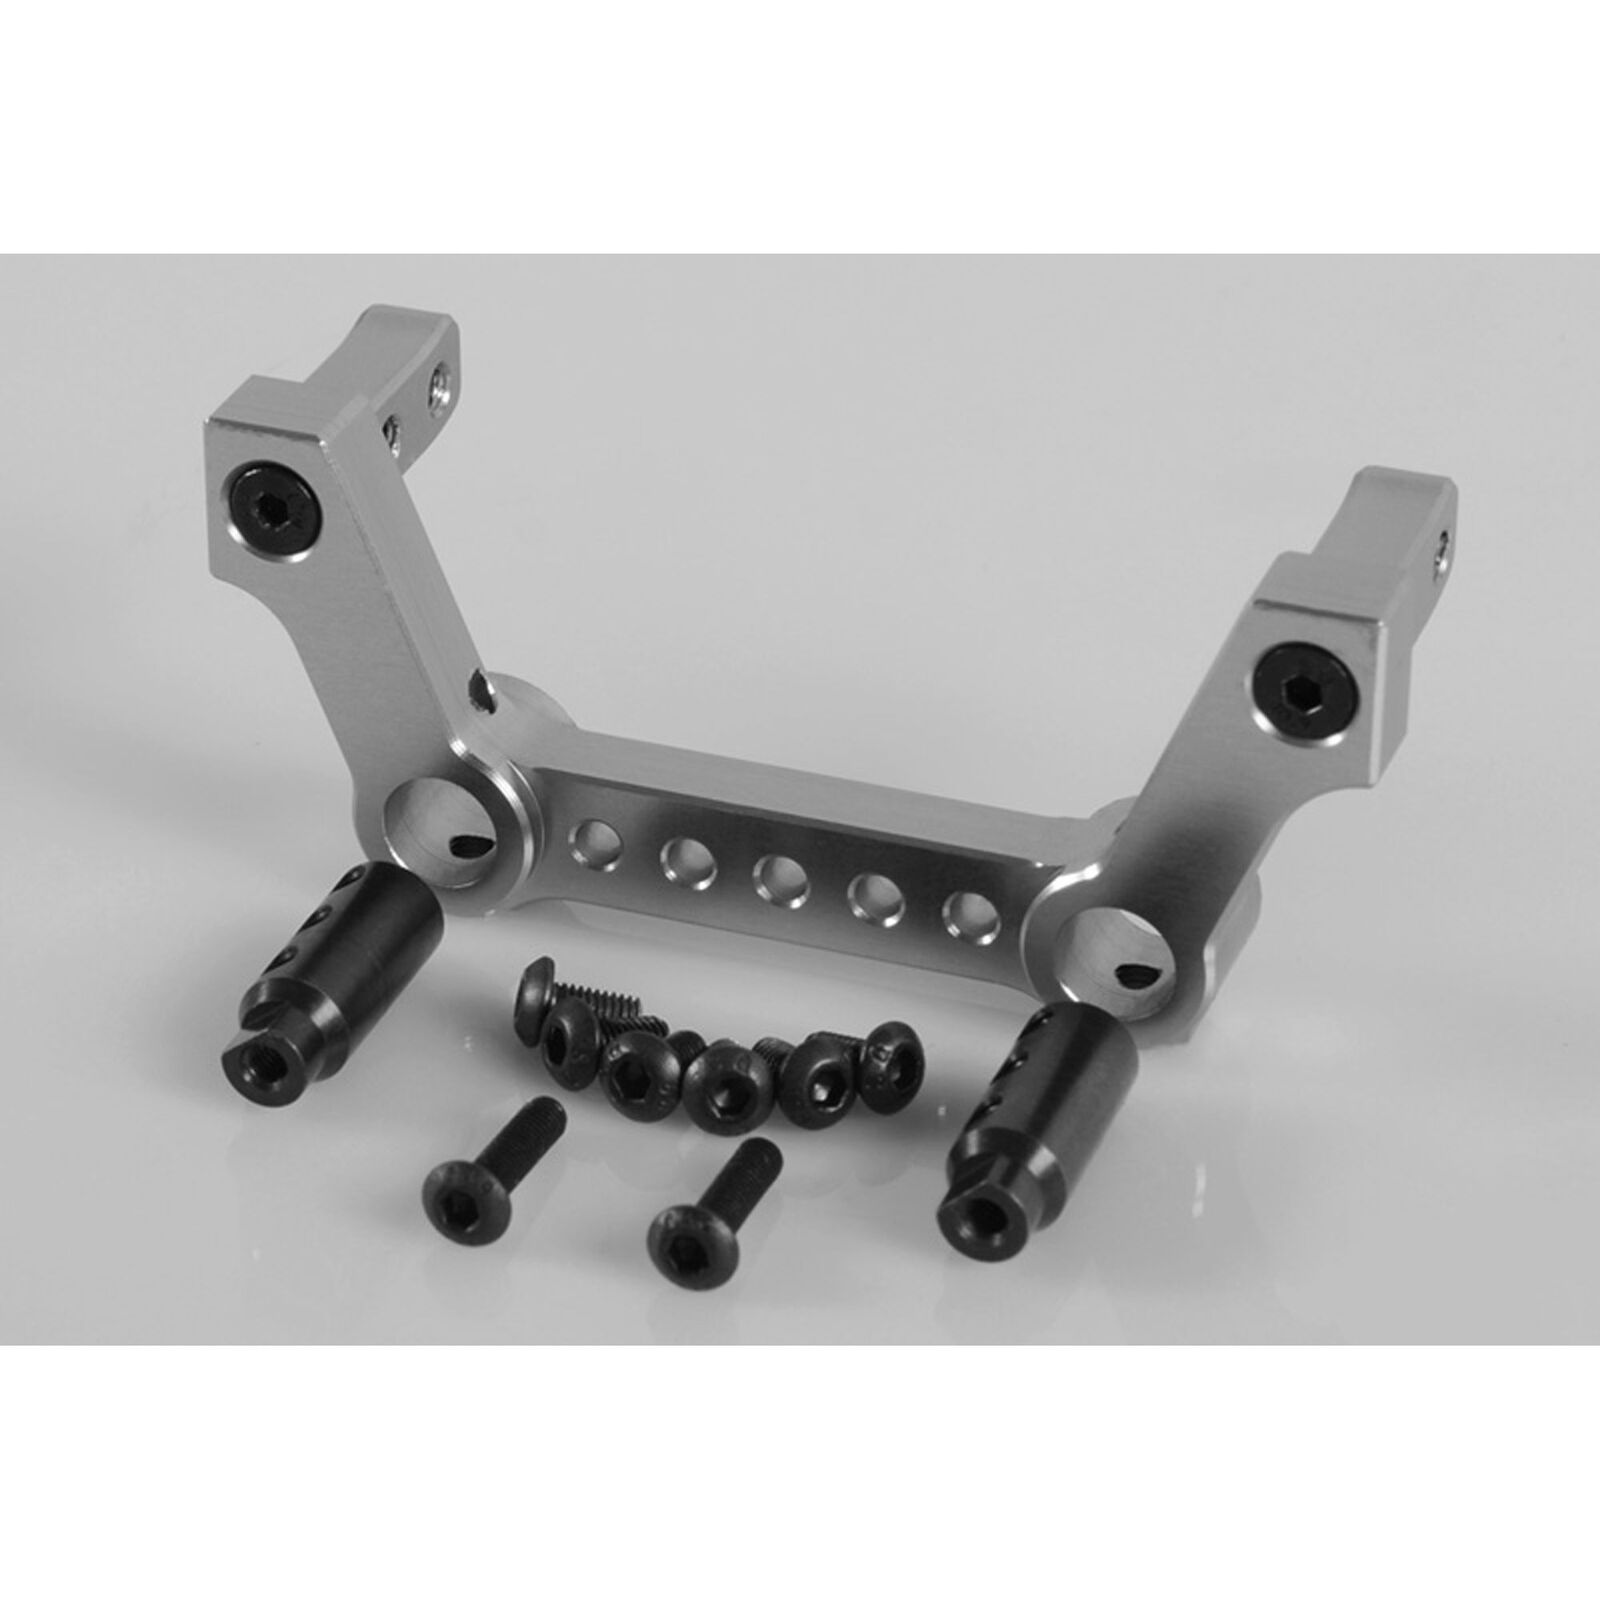 Blade Snow Plow Mounting Kit: Axial SCX10